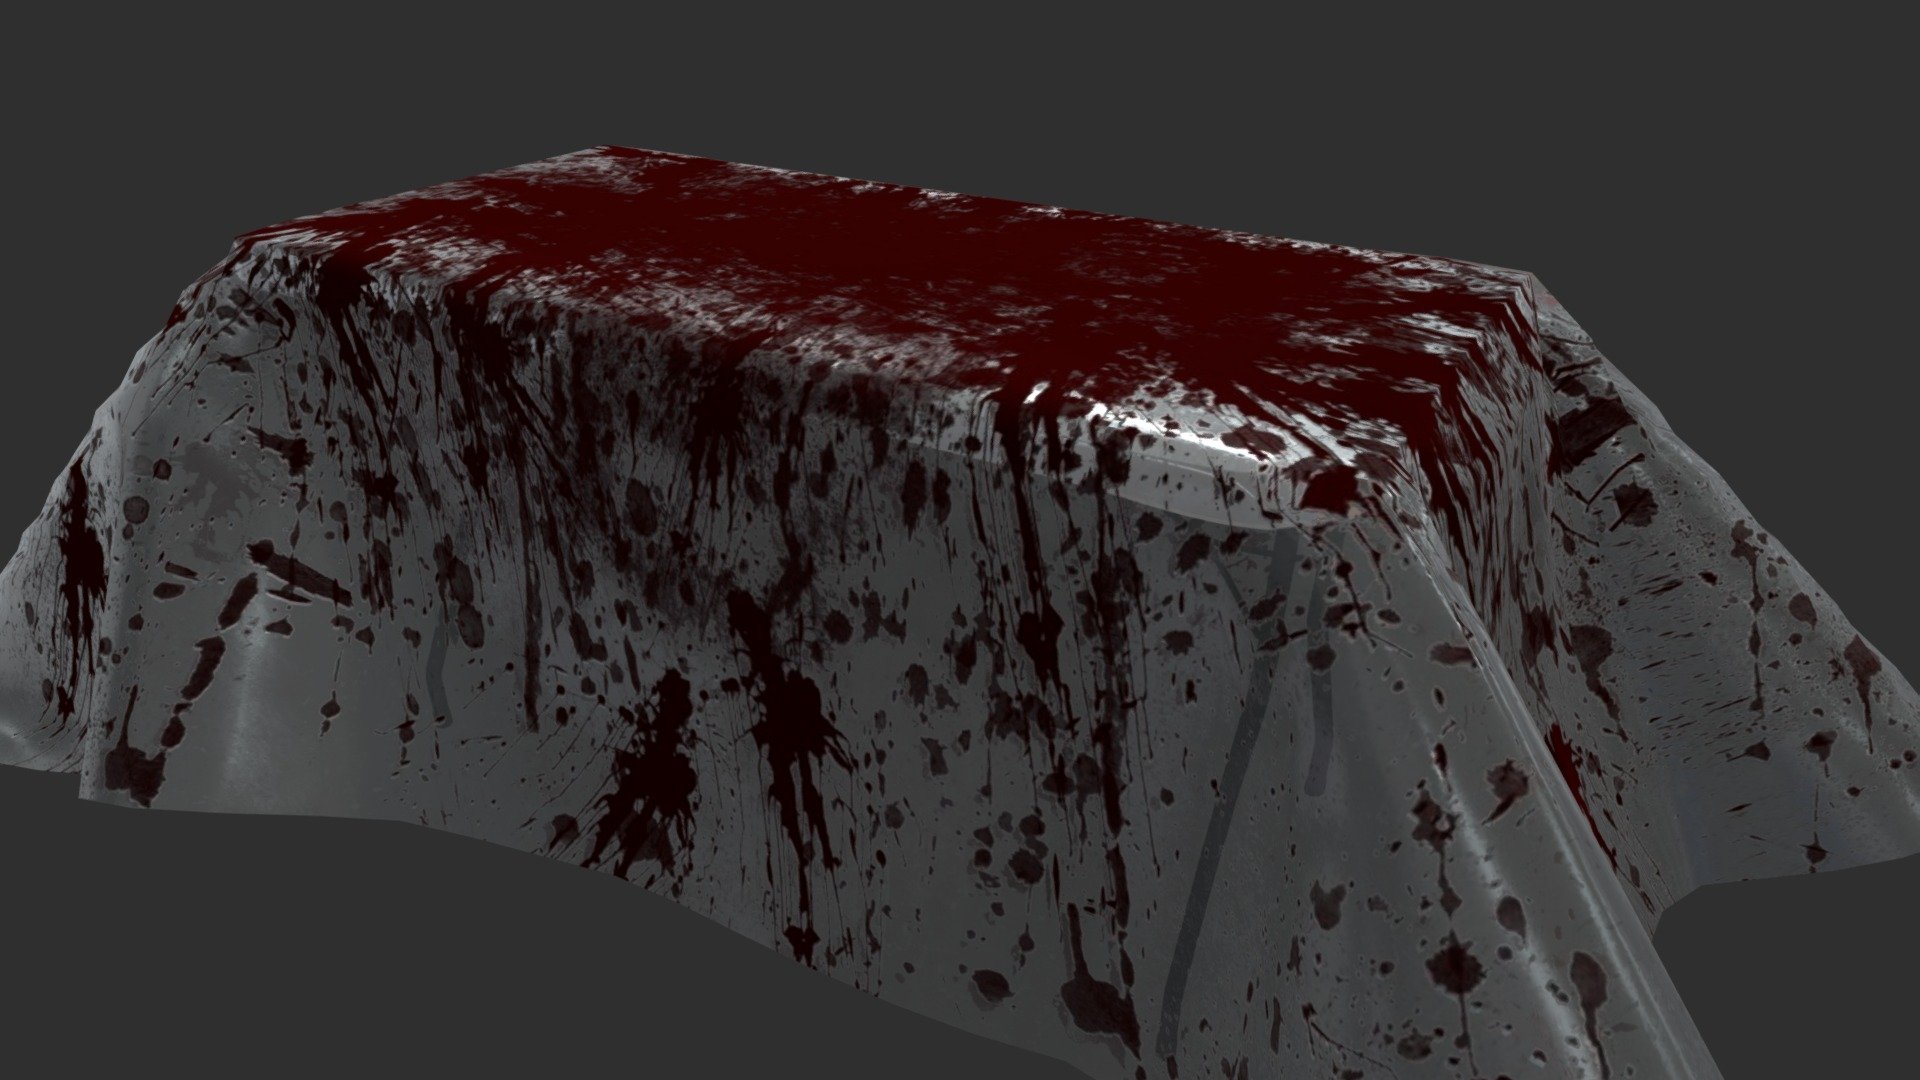 An outdoor camping table with a plastic sheet on top that a serial killer uses to kill people on. The mesh was created in Maya, using nCloth for the plastic. Texturing was done in Mixer 3d model